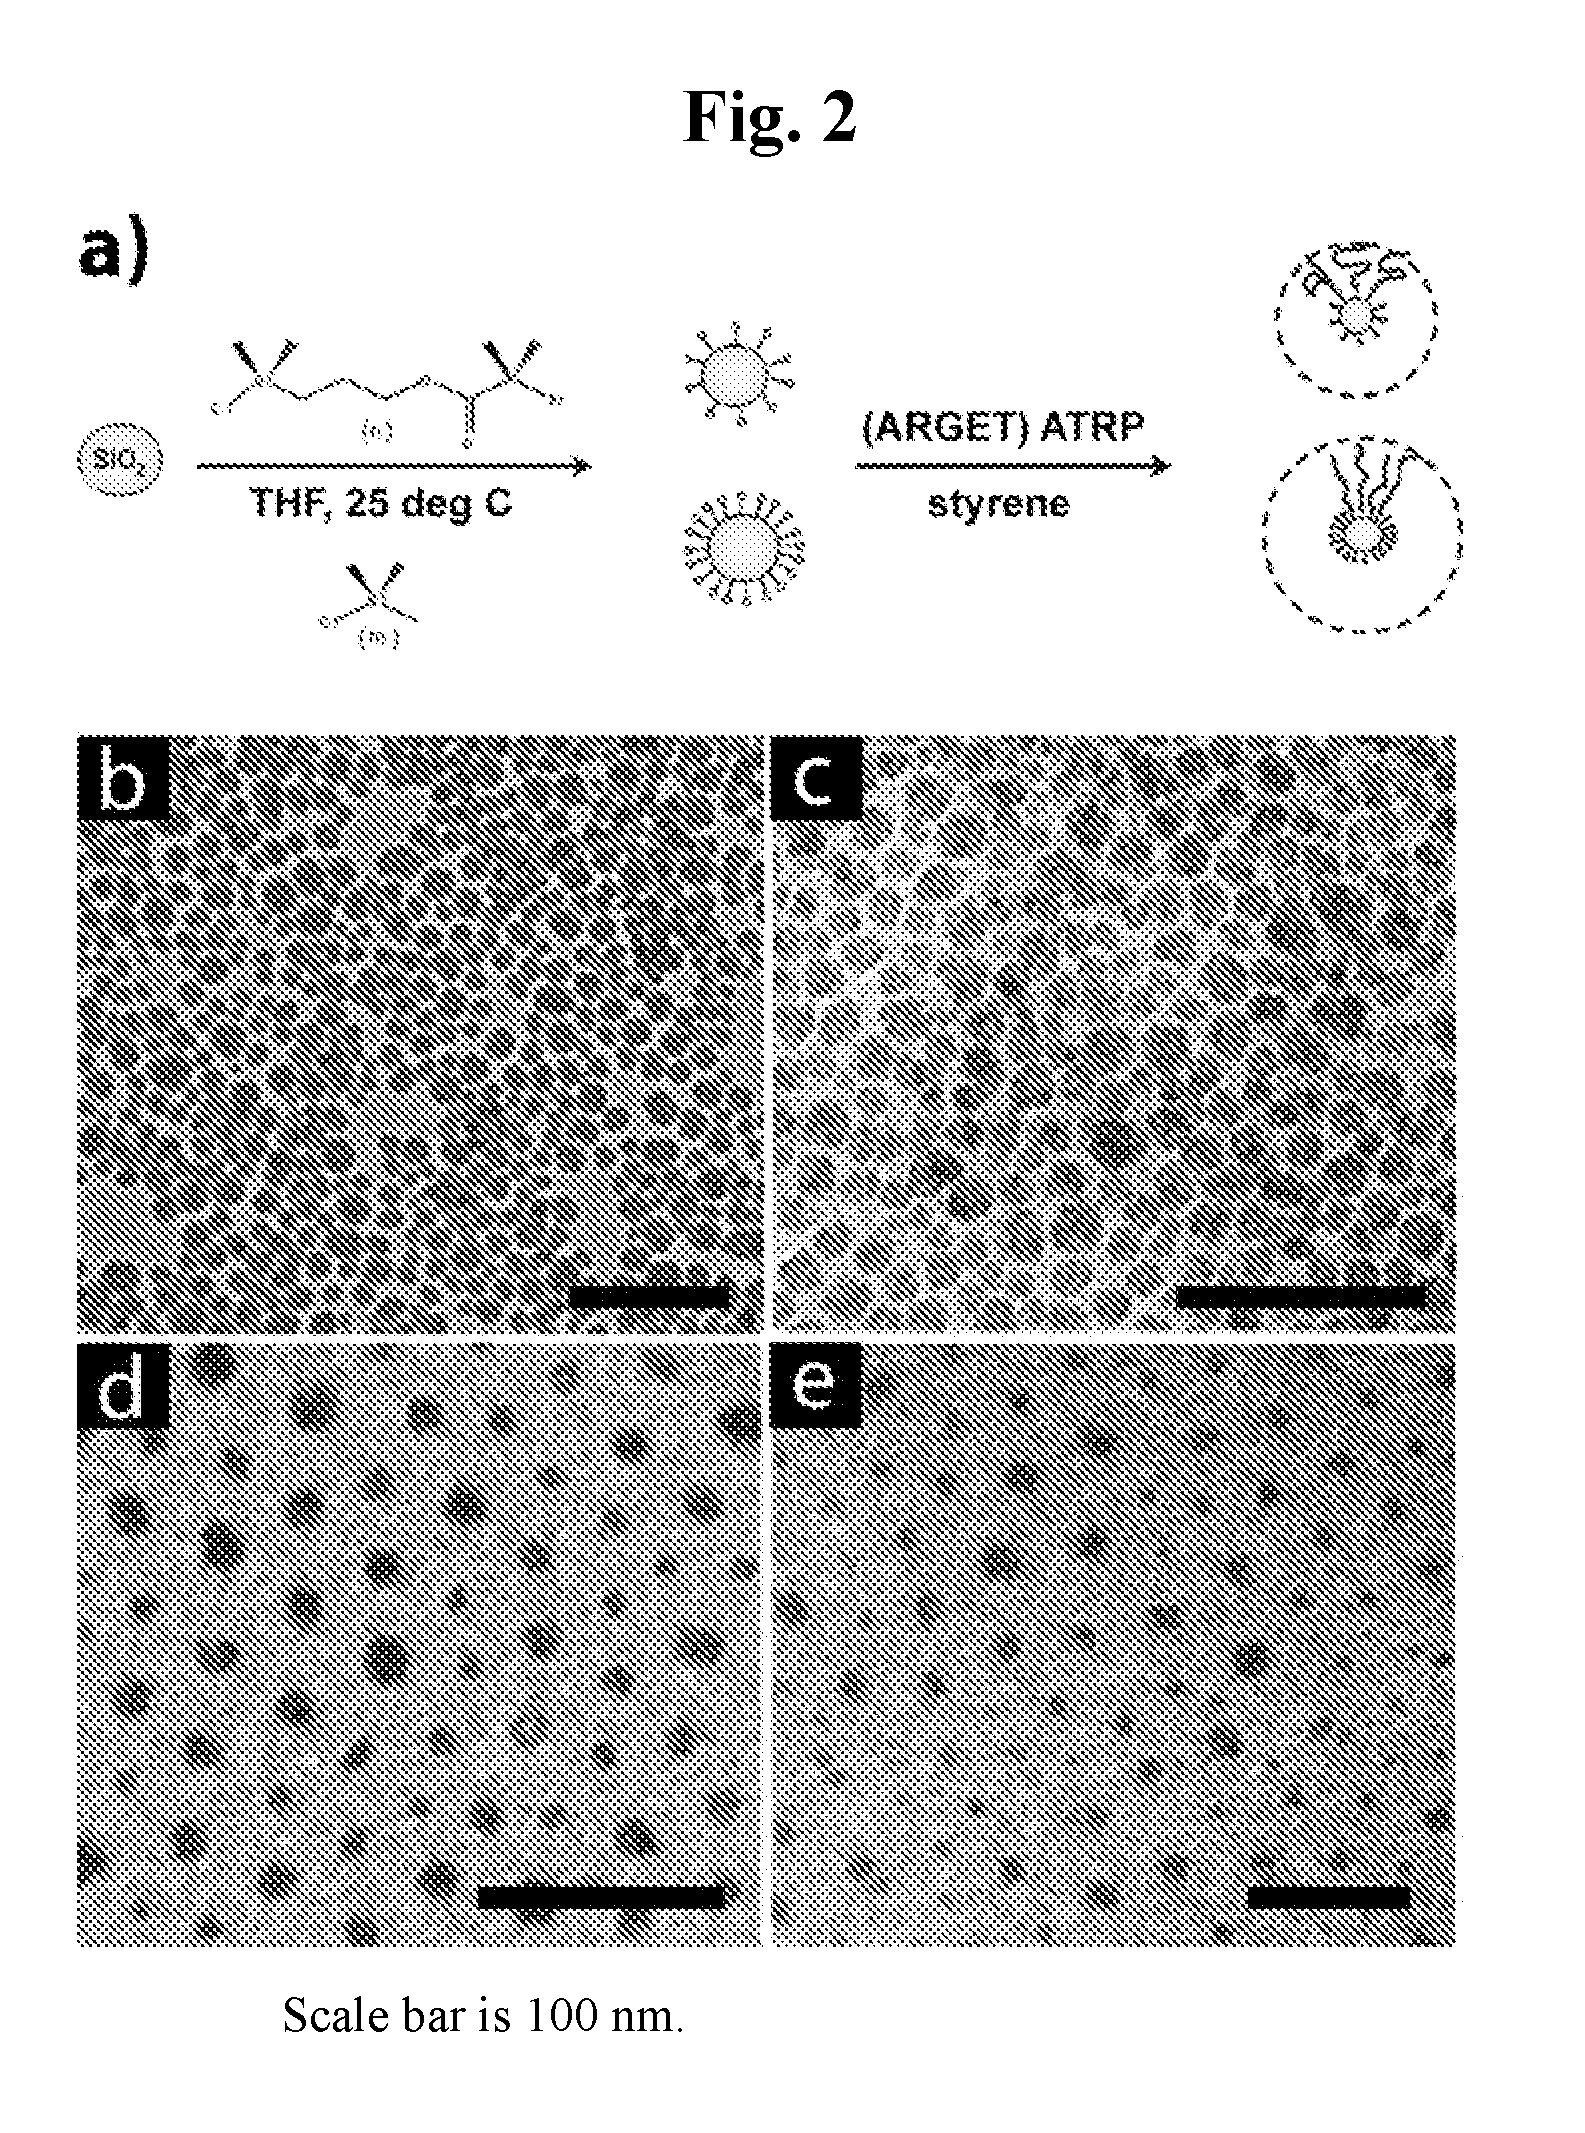 Hybrid partice composite structures with reduced scattering